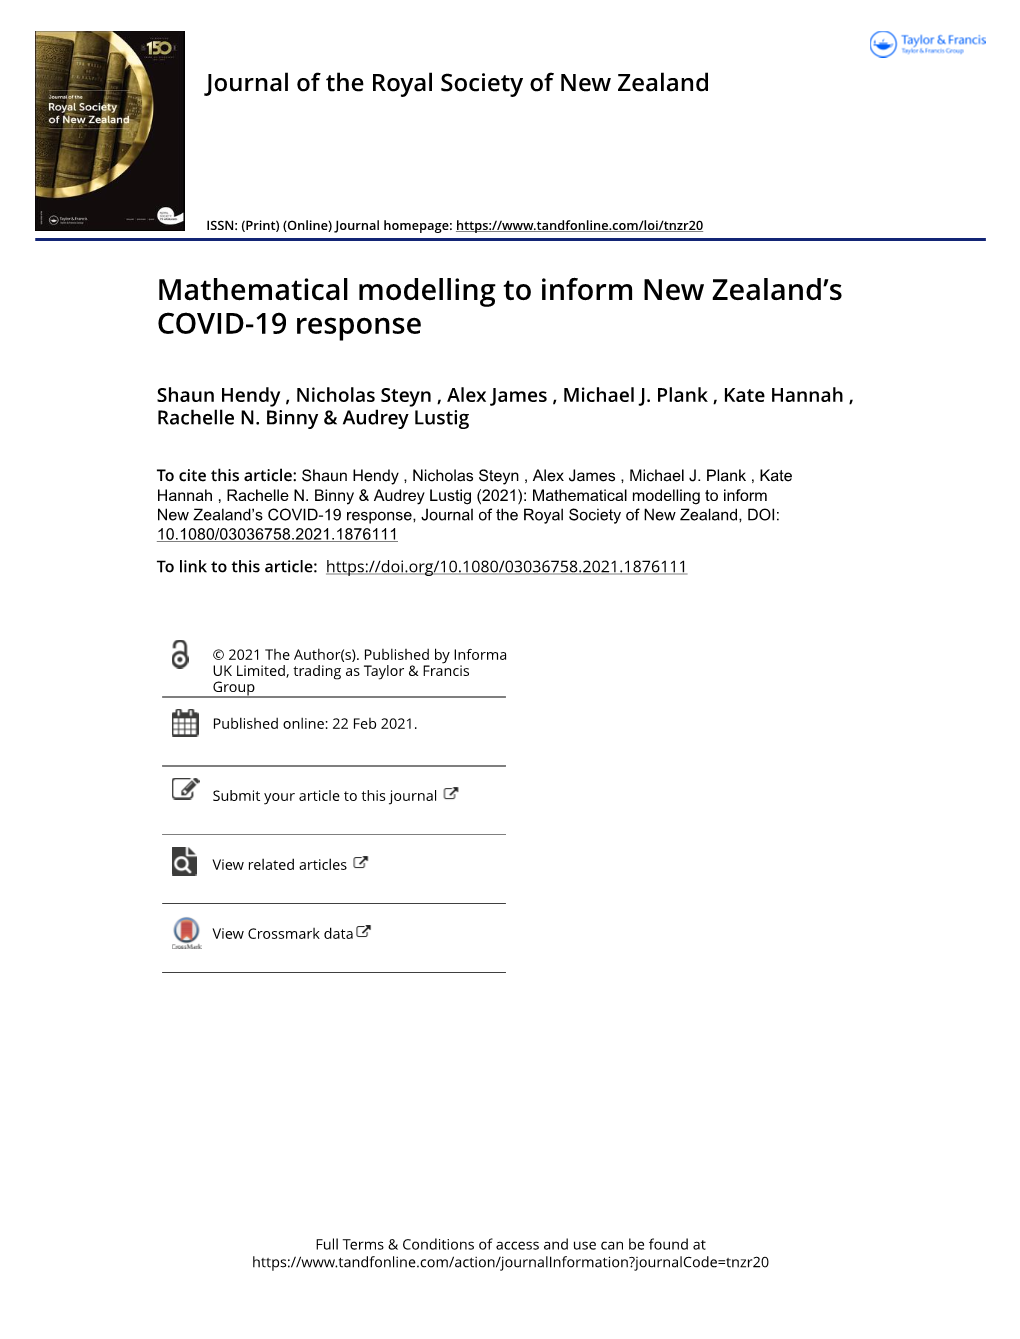 Mathematical Modelling to Inform New Zealand's COVID-19 Response